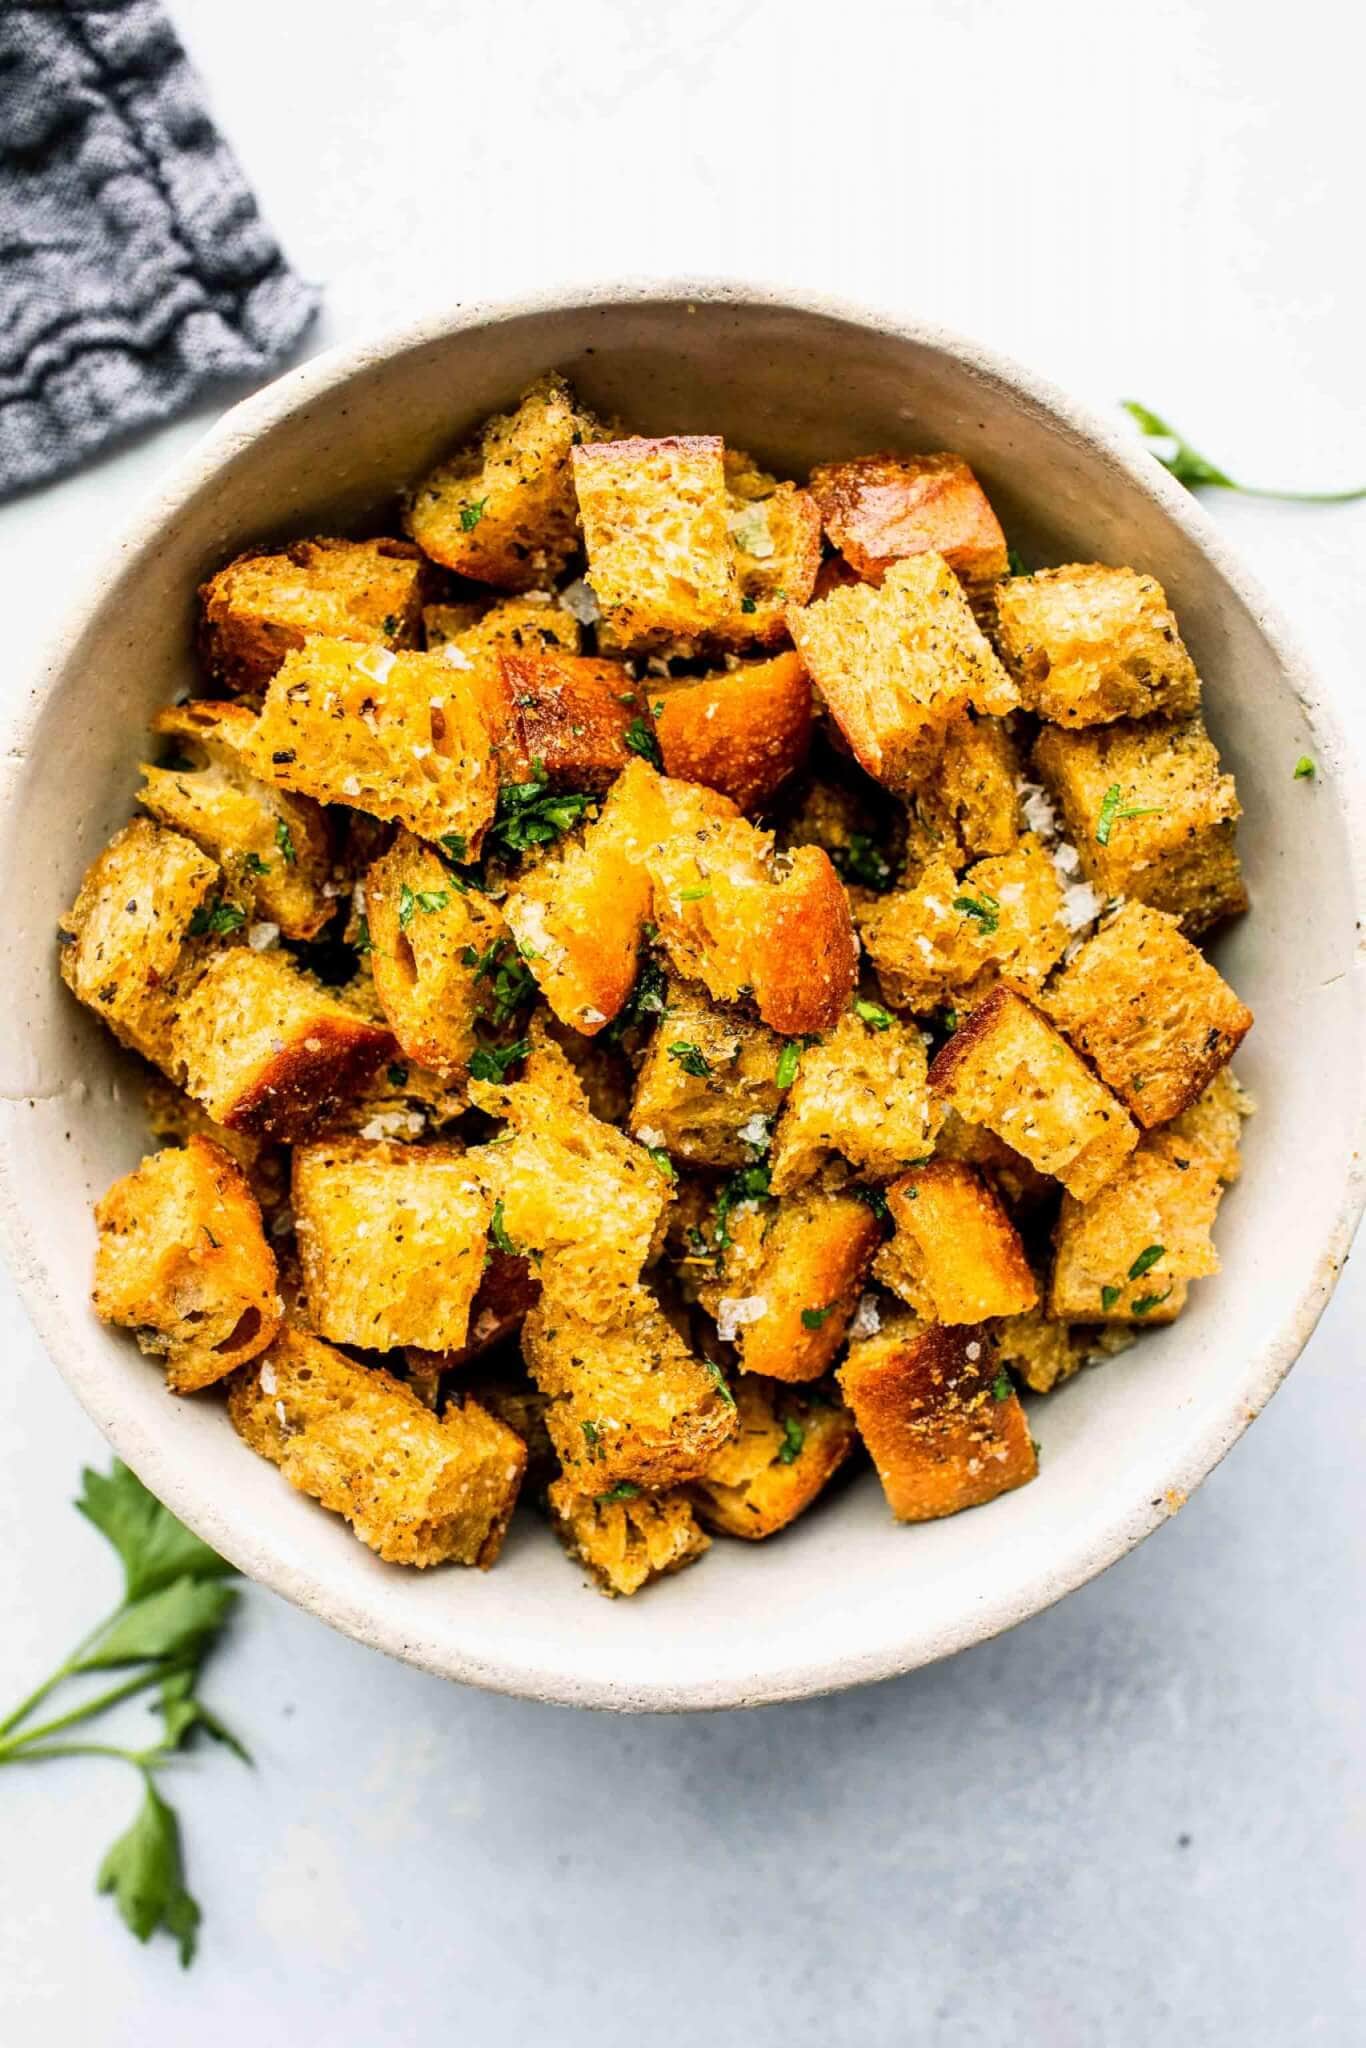 Bowl of croutons sprinkled with parsley.